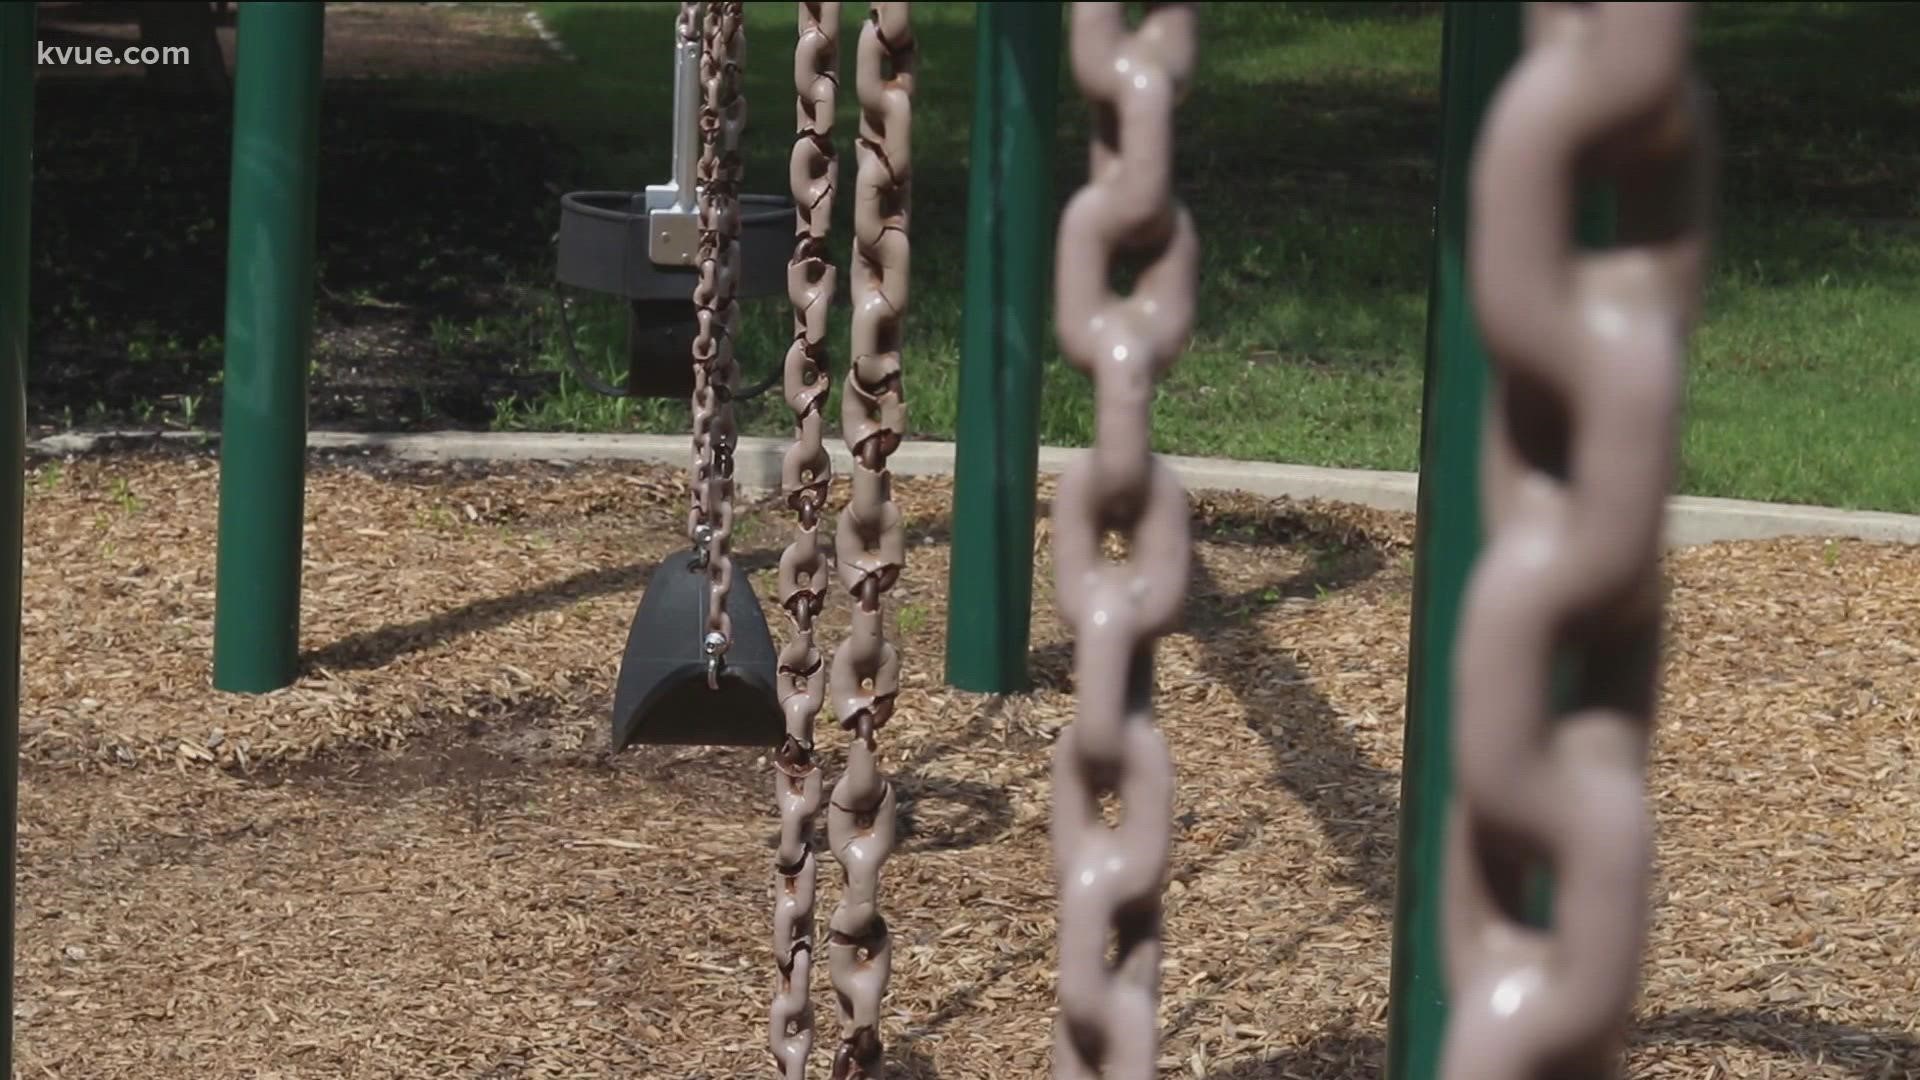 New information is emerging regarding sex trafficking allegations at a children's live-in therapy center.